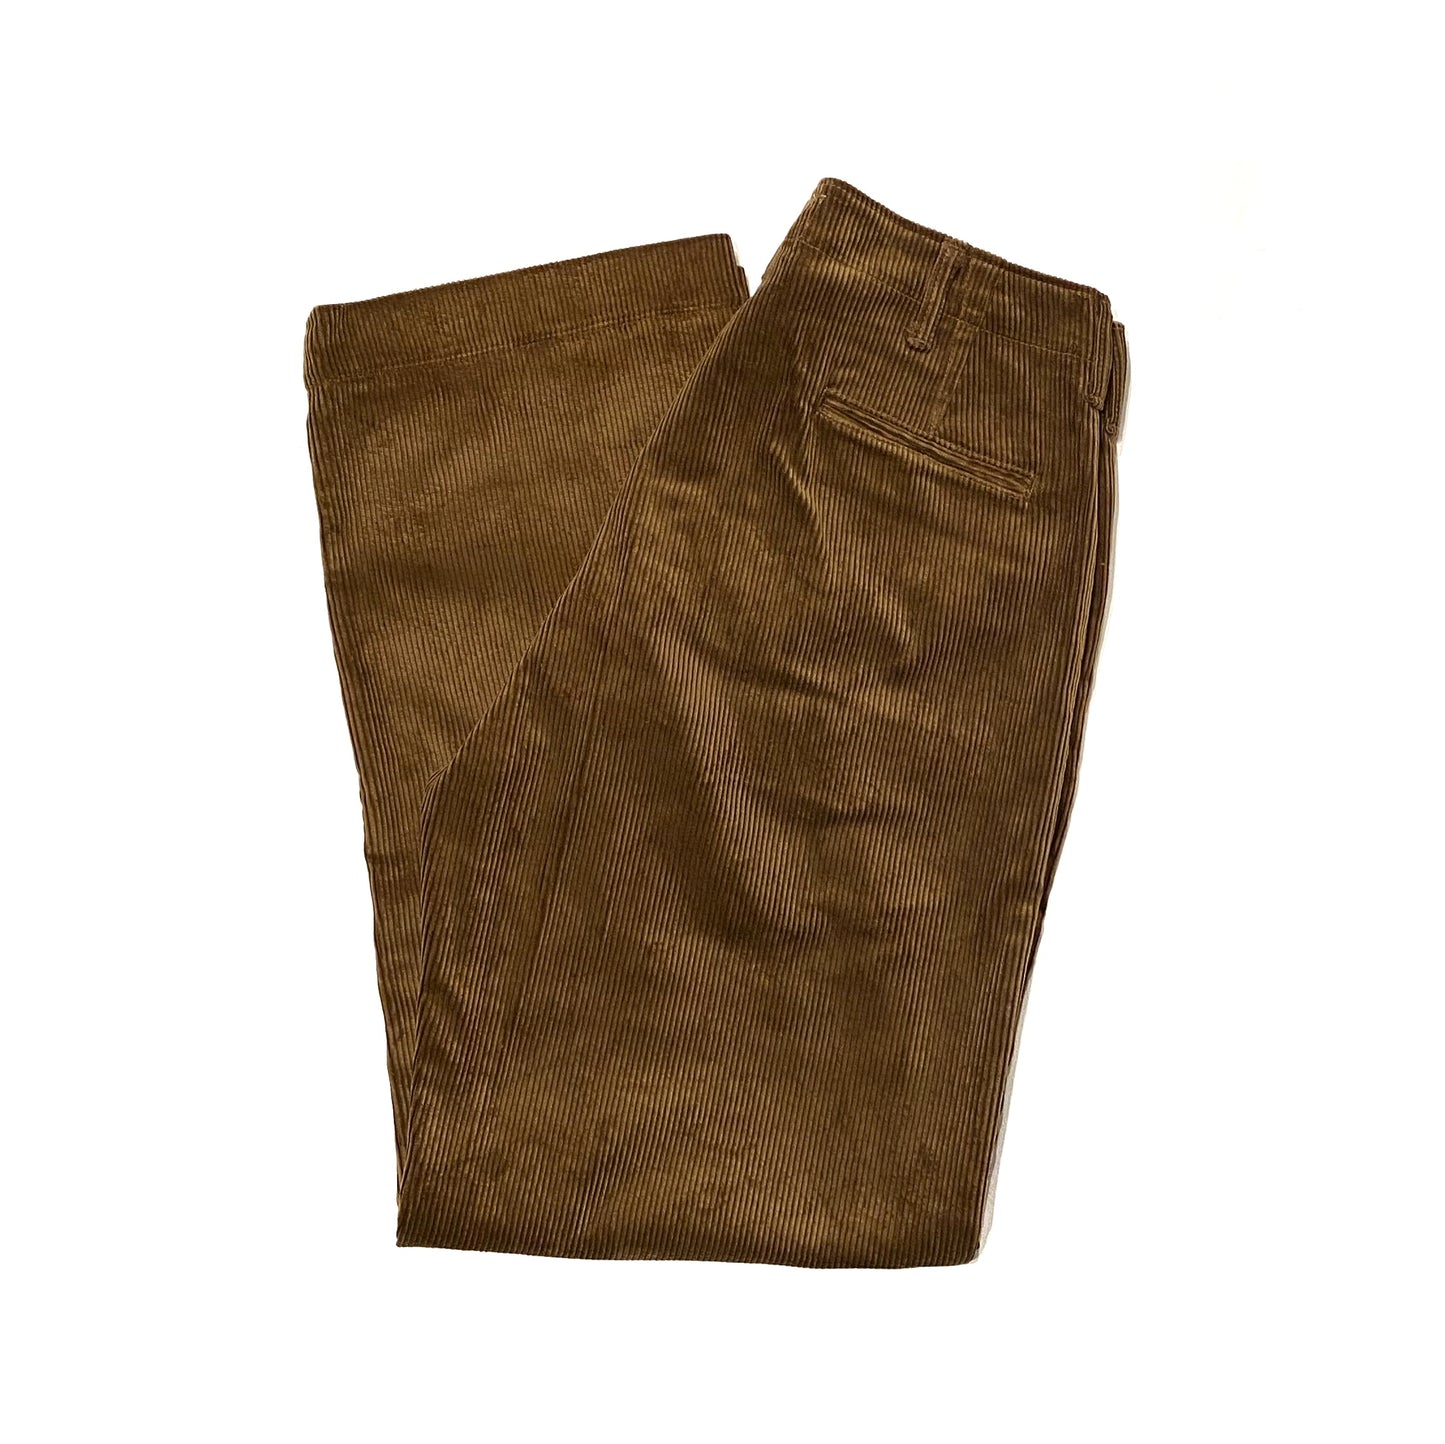 The Groovin High - Lot.490 1940s Style Work Pants (Brown)